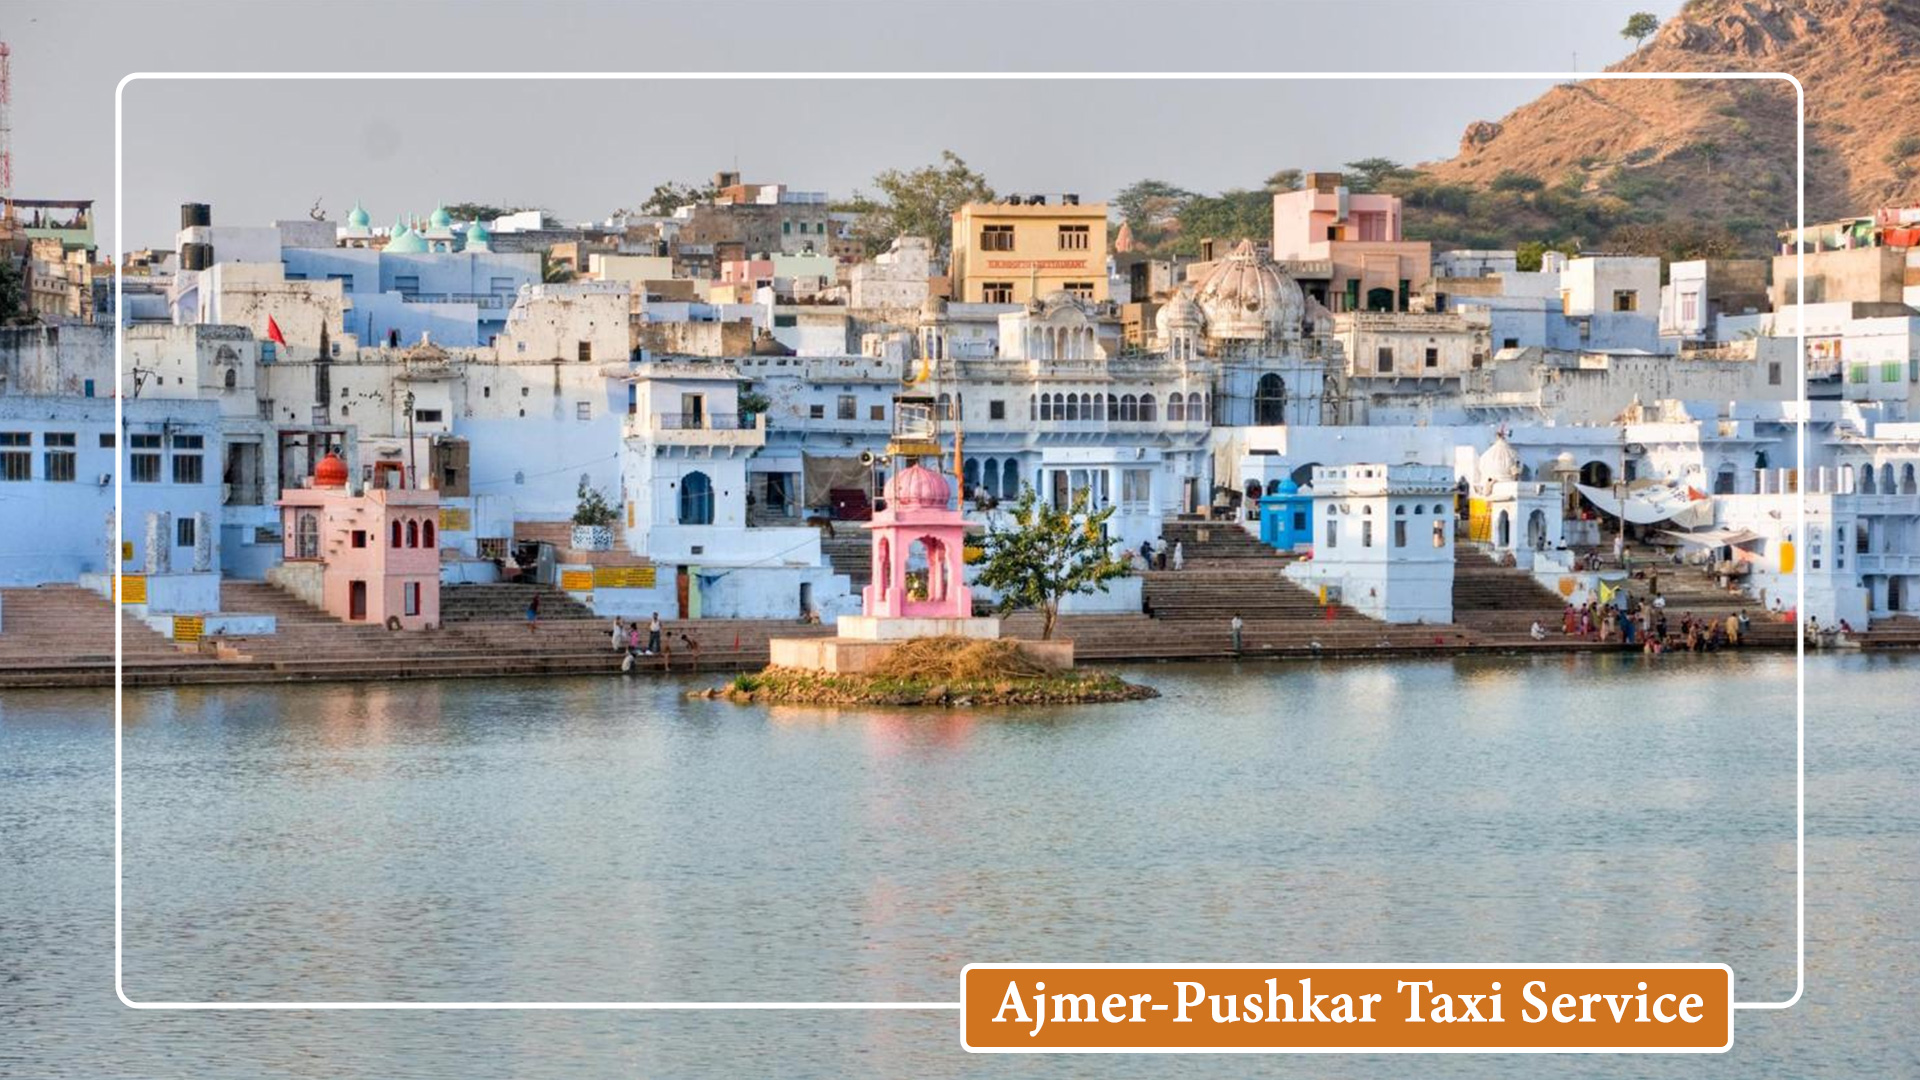 This image depicts the Jaipur to Ajmer Cab service with a beautiful view of Ajmer lake.